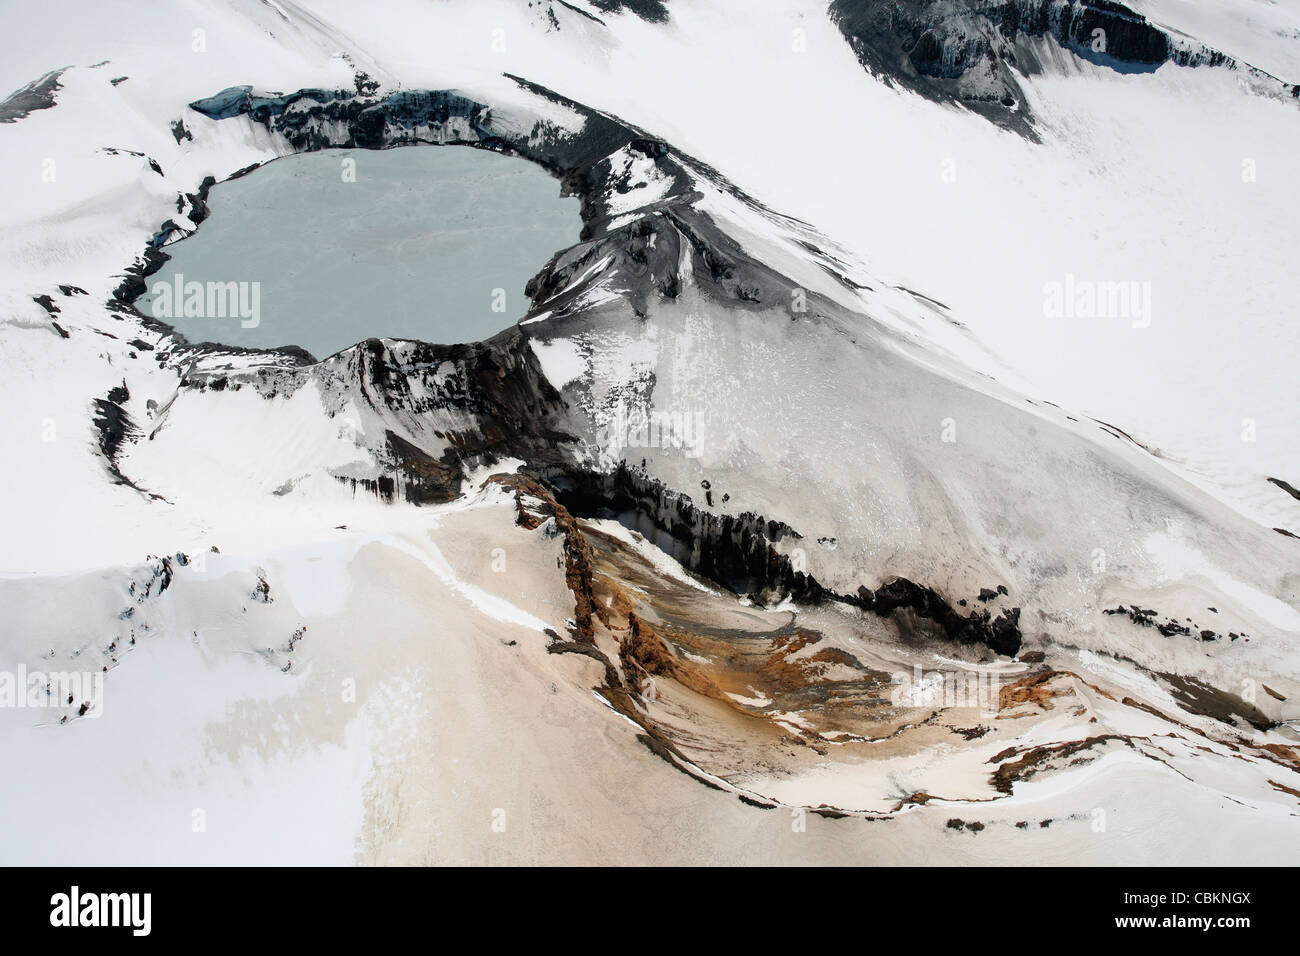 November 2007 - Aerial view of snow-covered Ruapehu volcano summit crater with acidic lake, New Zealand. Stock Photo